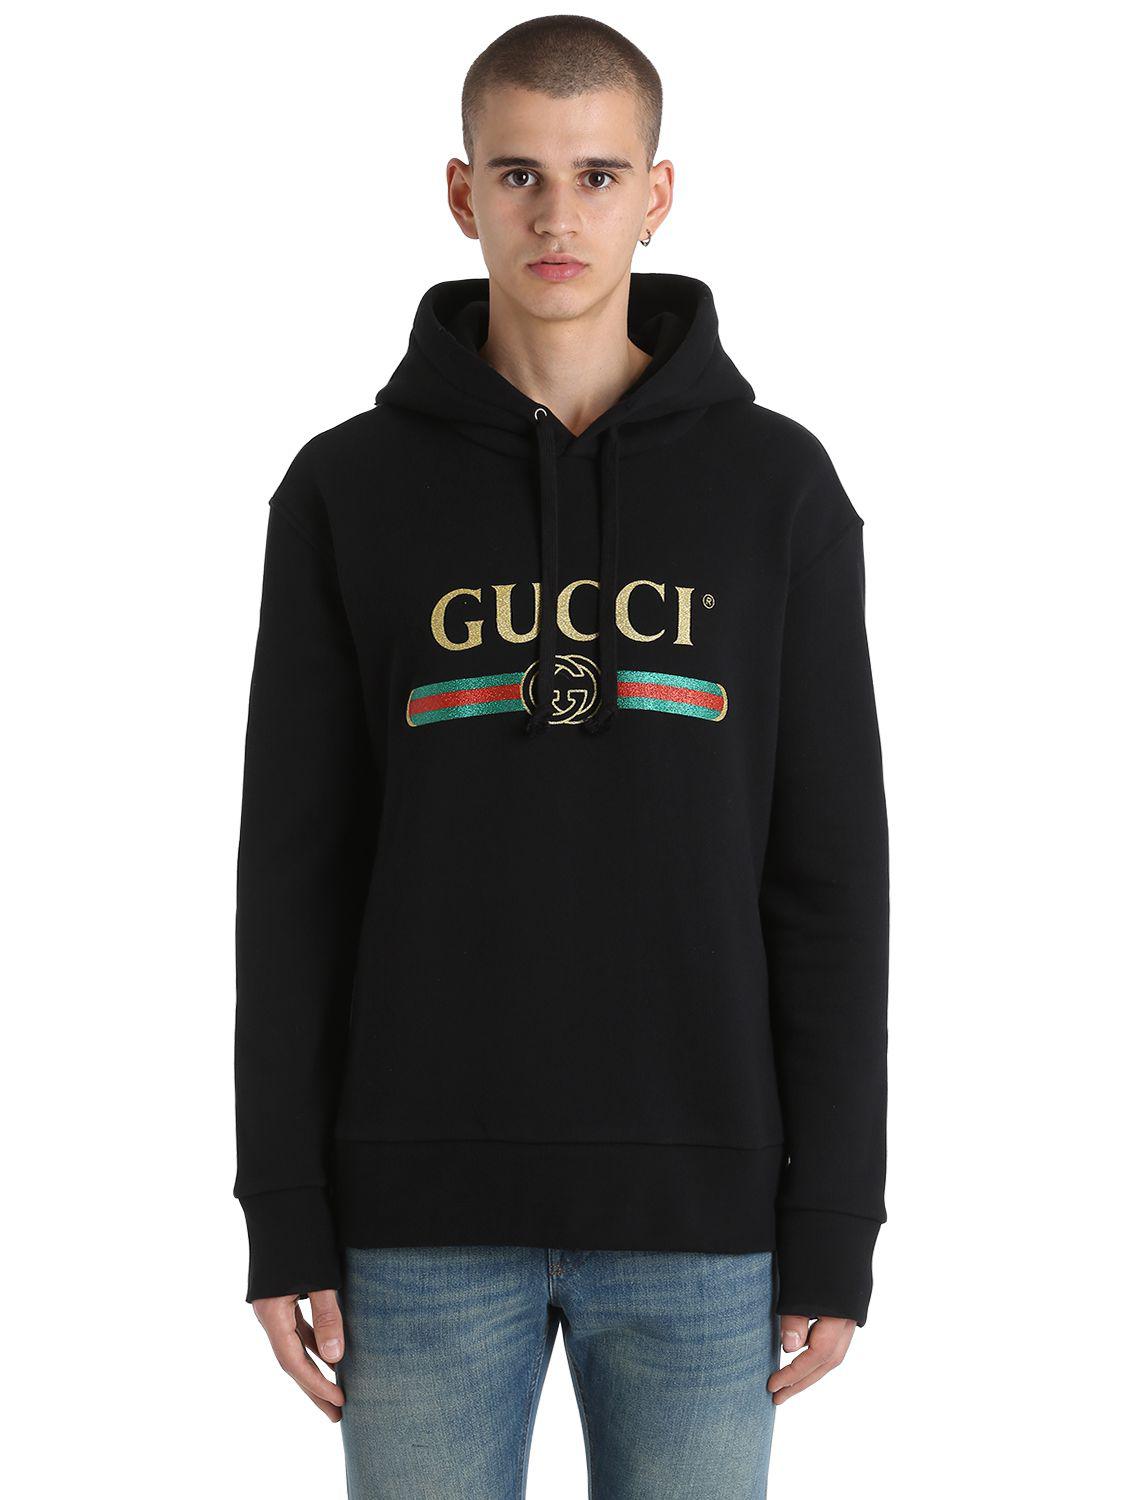 Gucci Wolf Patches Hooded Cotton Sweatshirt in Black for Men - Lyst